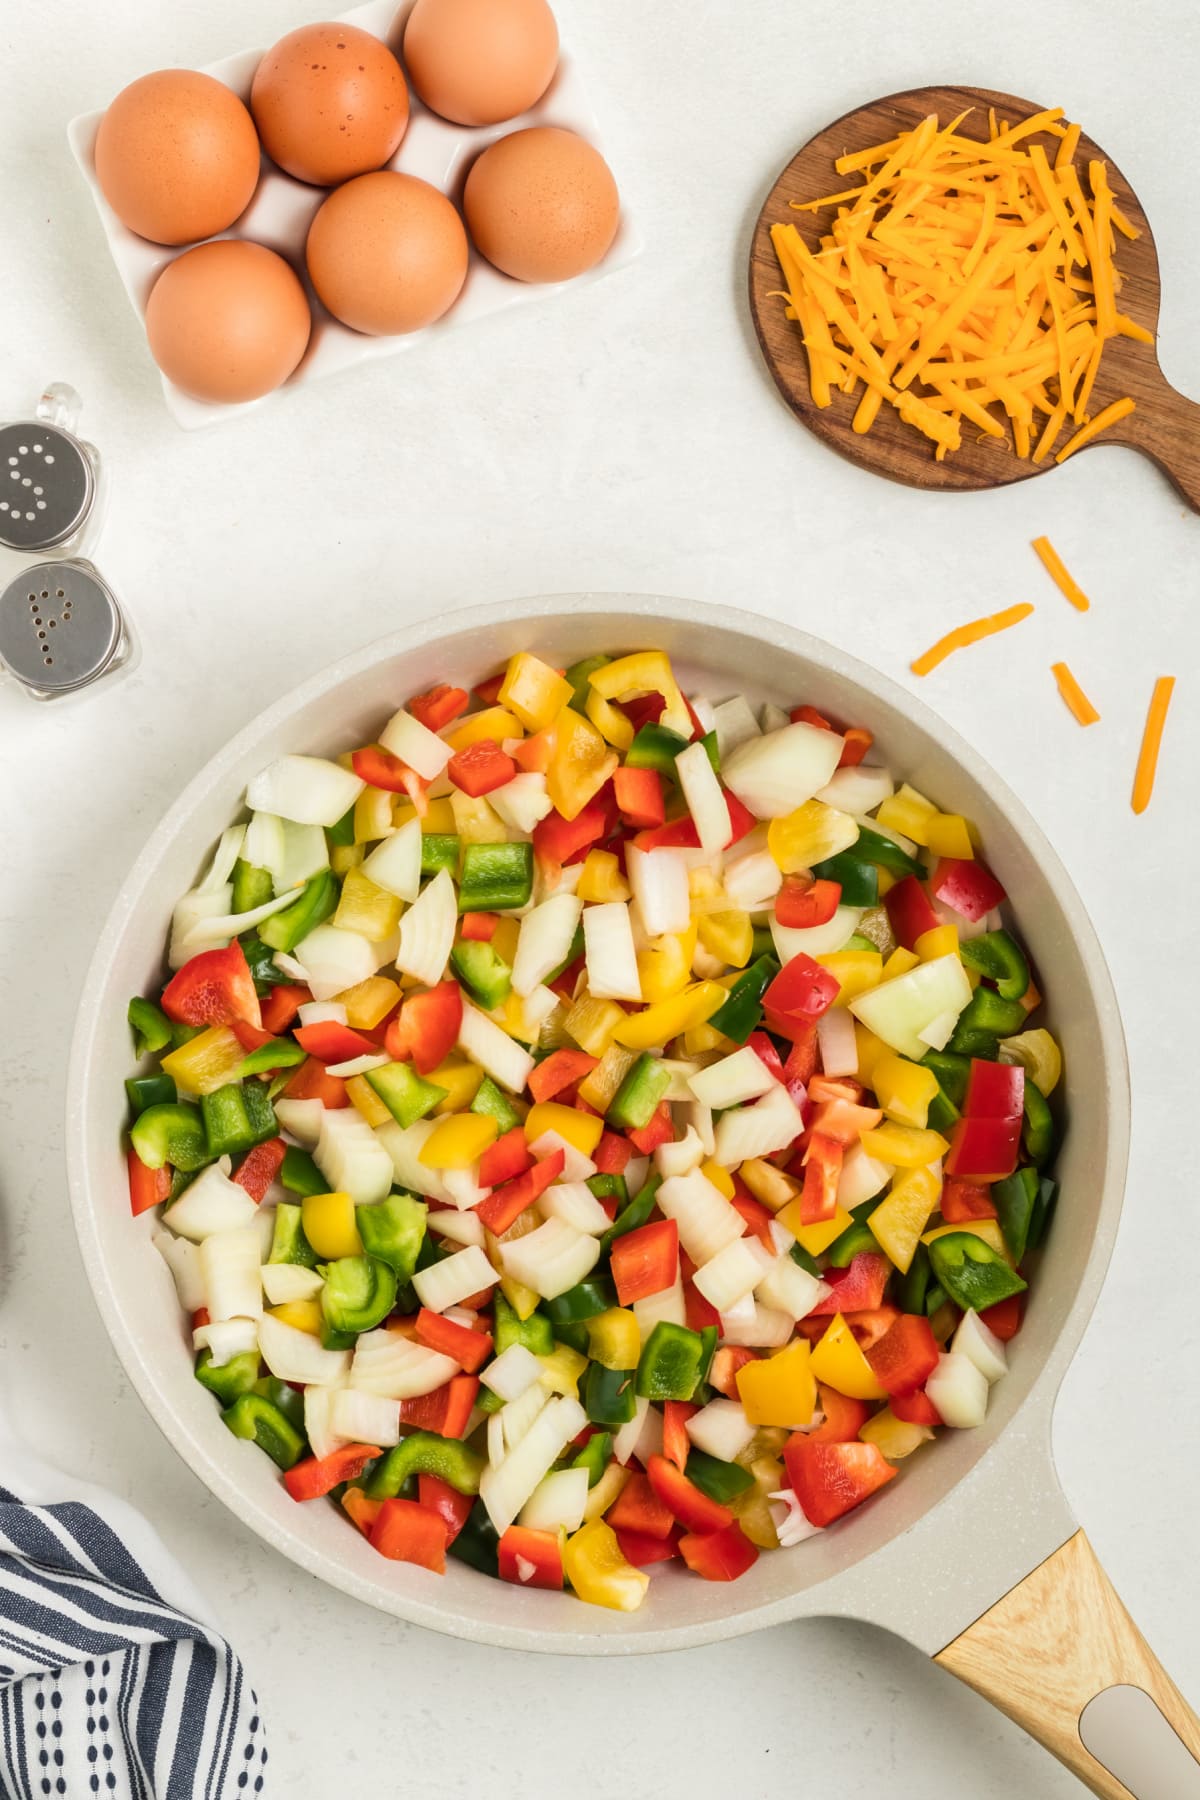 Diced vegetables in a pan